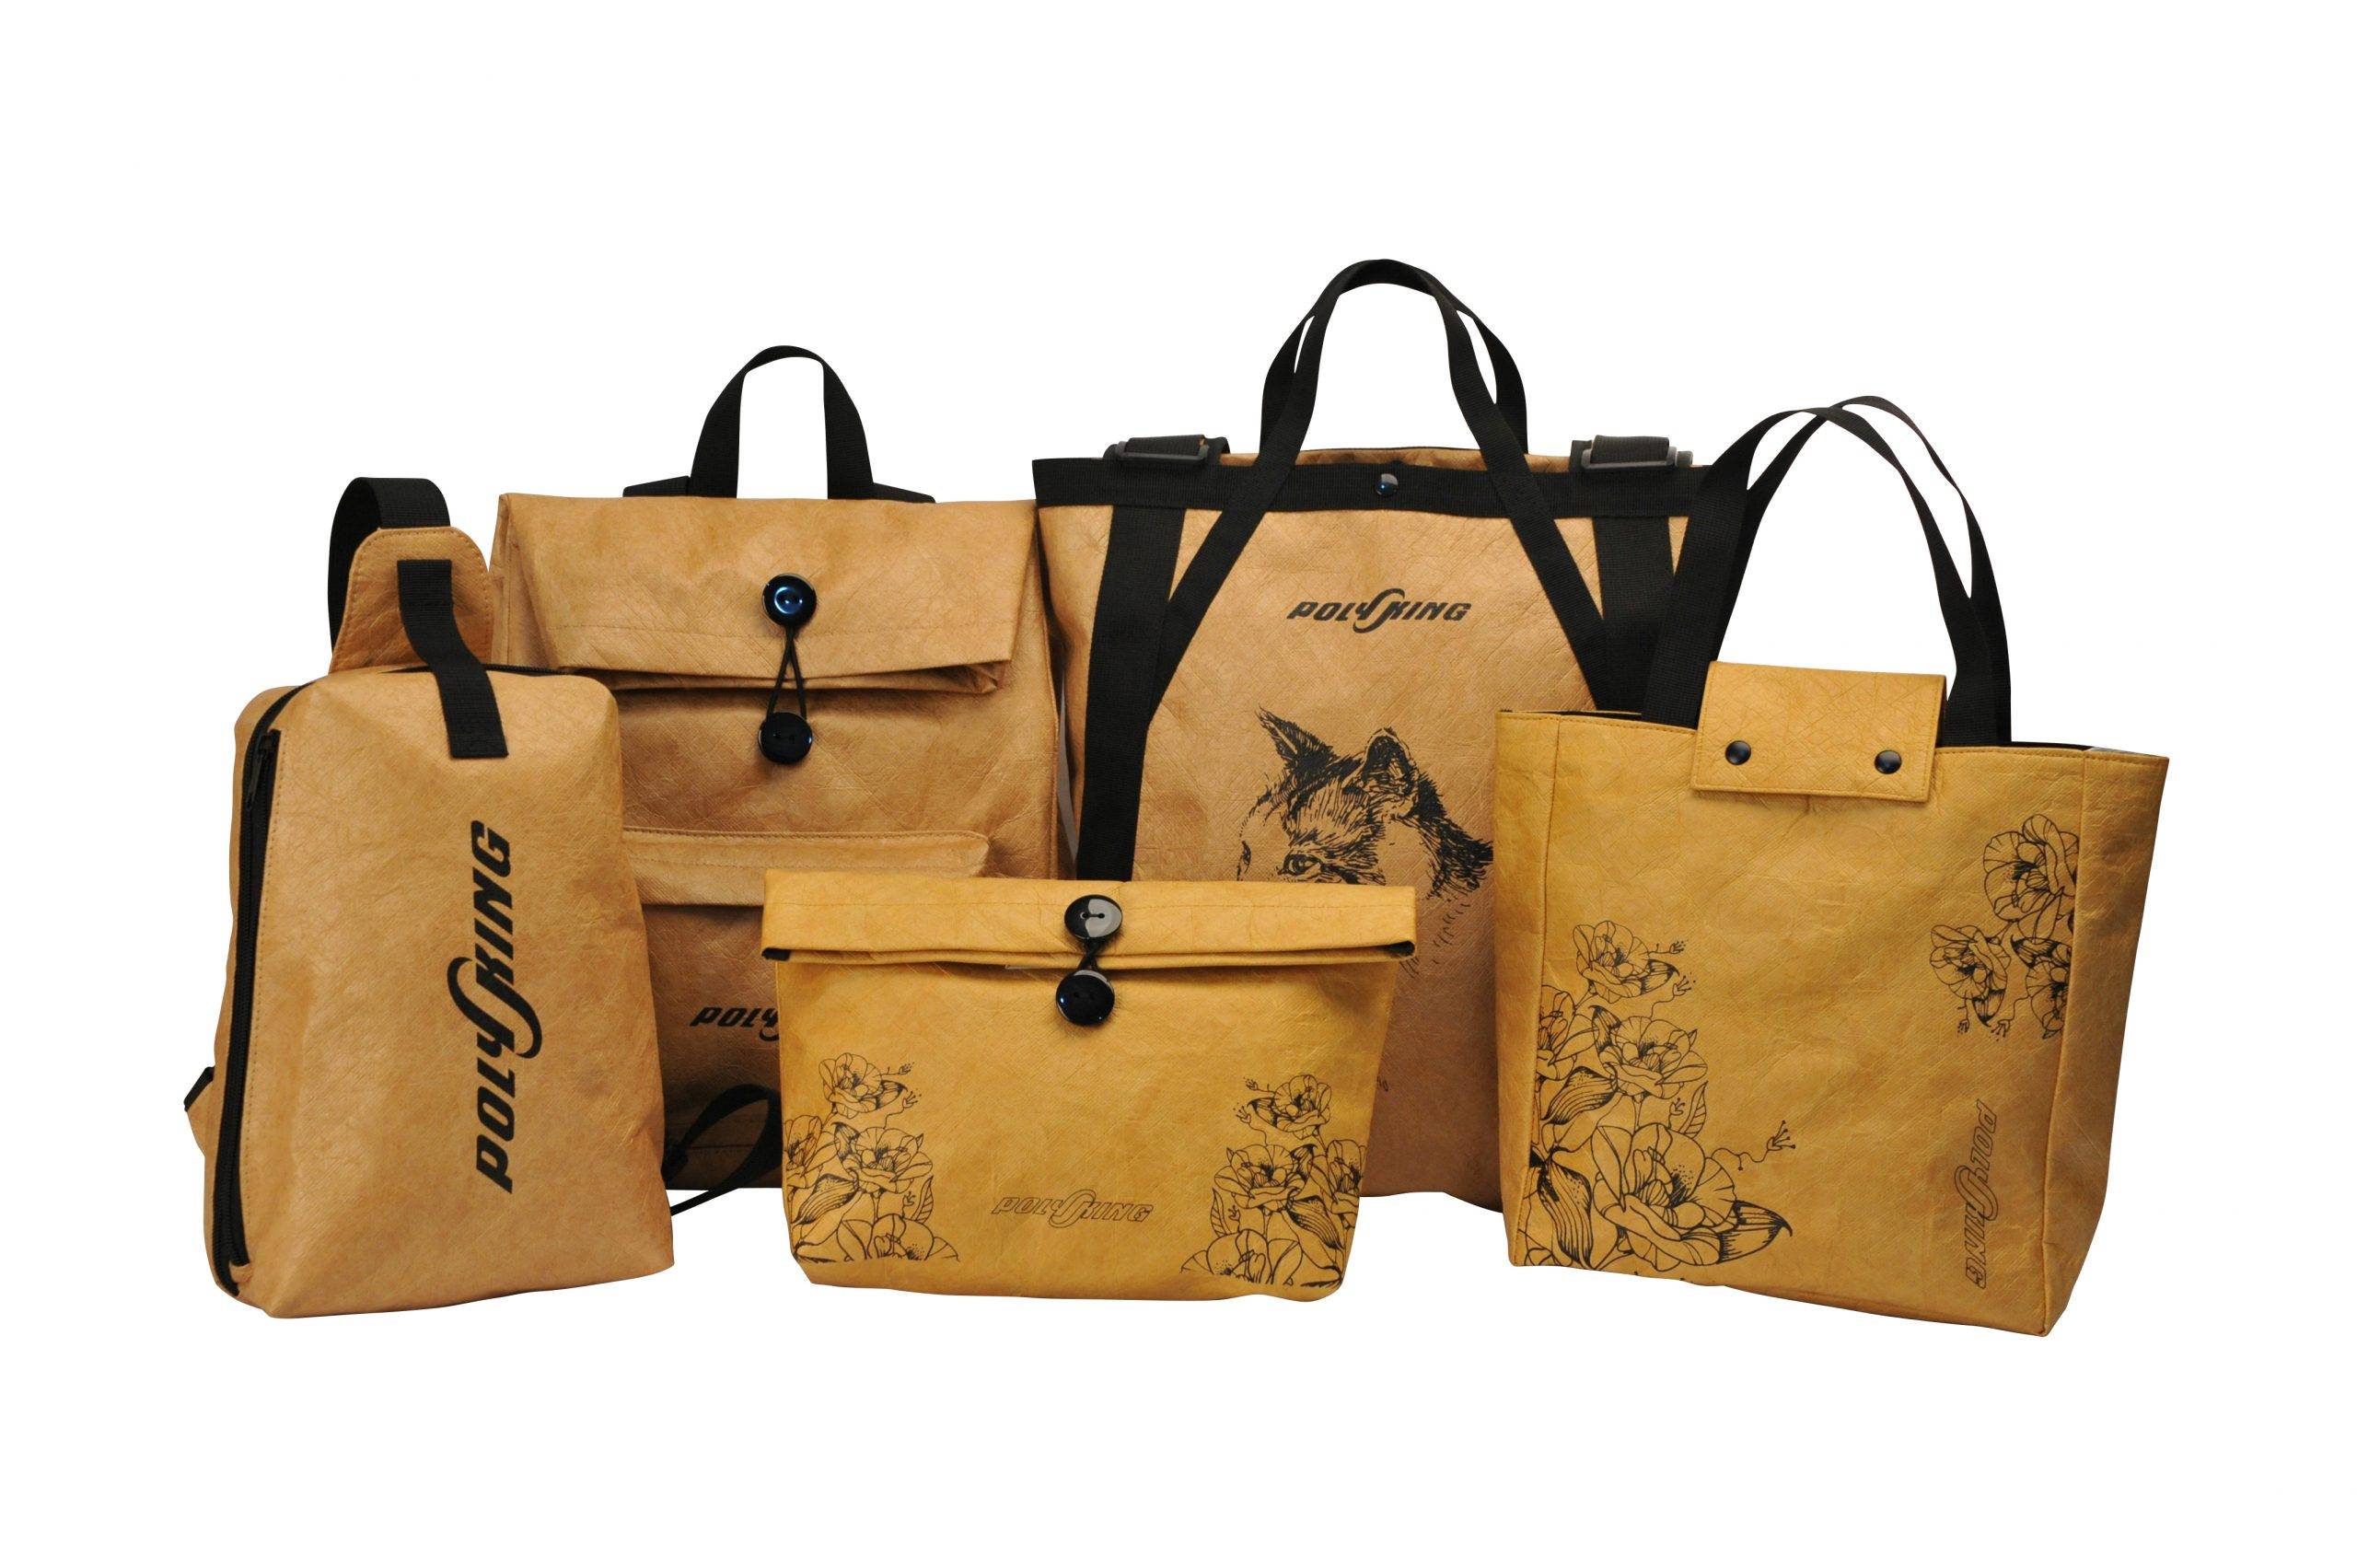 Serveral eco-friendly bag made with kraft paper material.